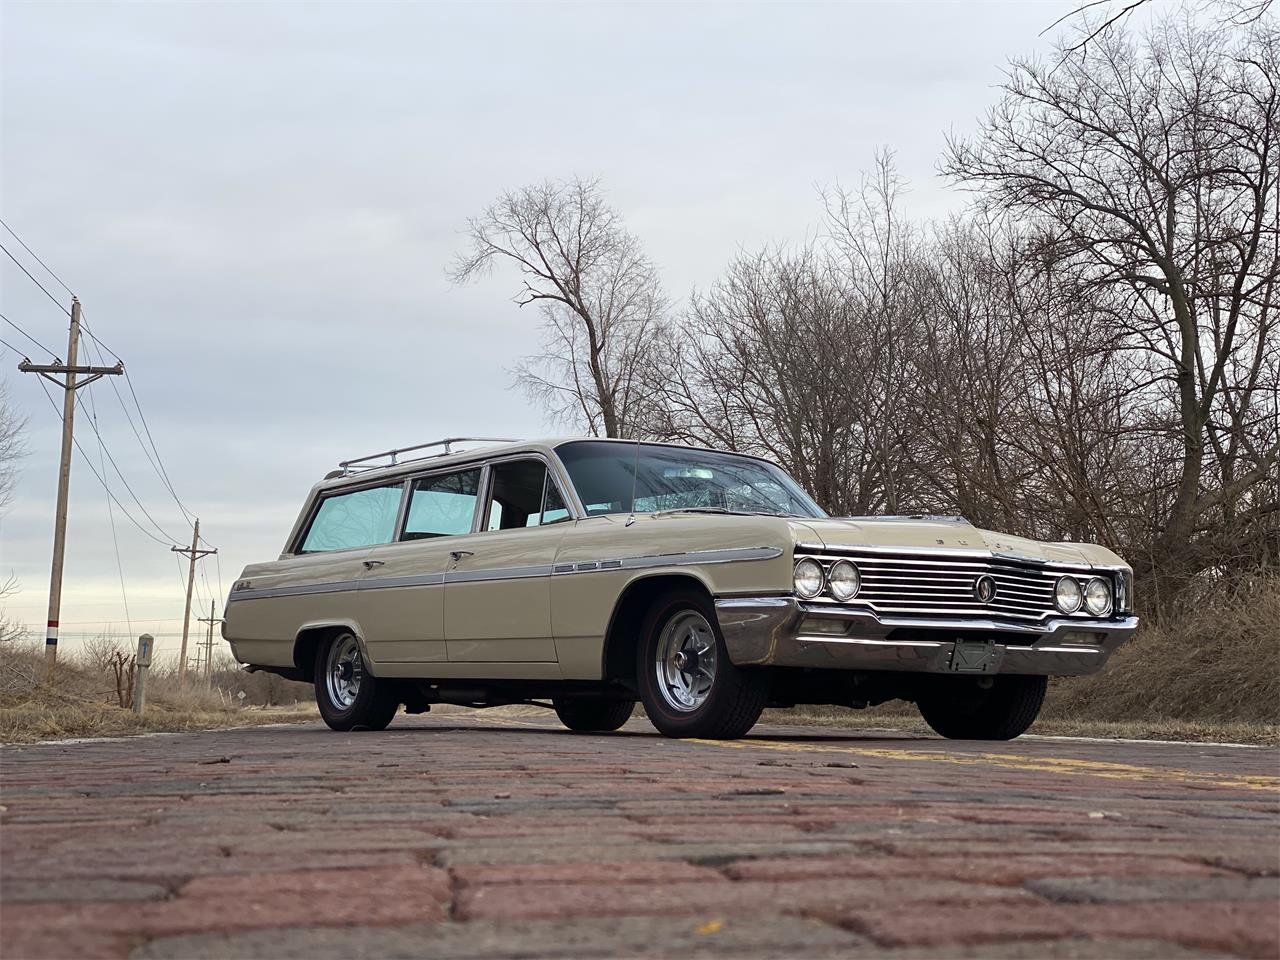 1964 Buick LeSabre Wagon for sale in Elkhorn, NE – photo 90